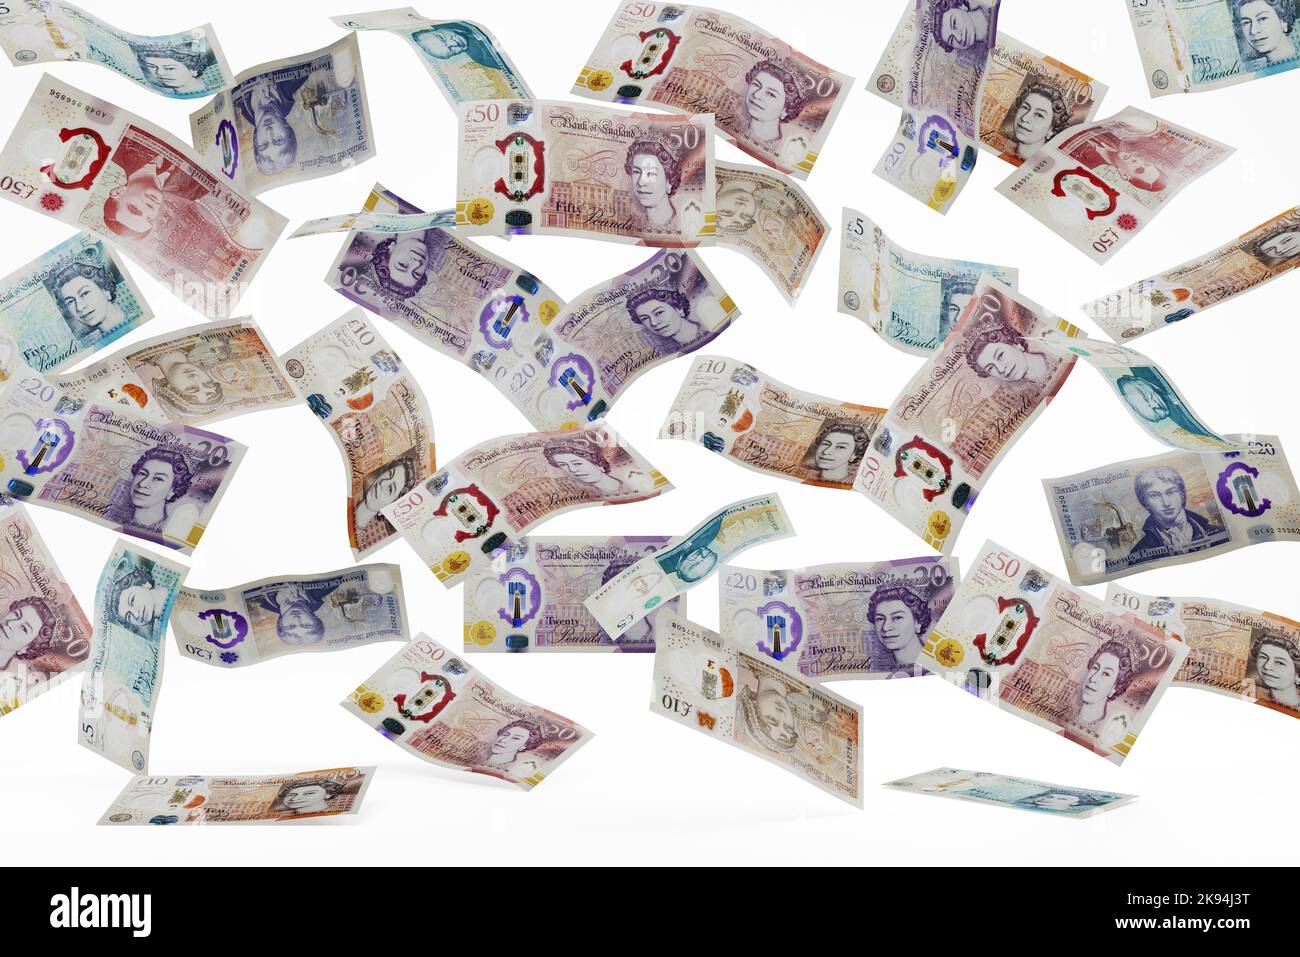 Falling UK money British pound drop dropping currency exchange fall concept polymer banknotes falling Stock Photo